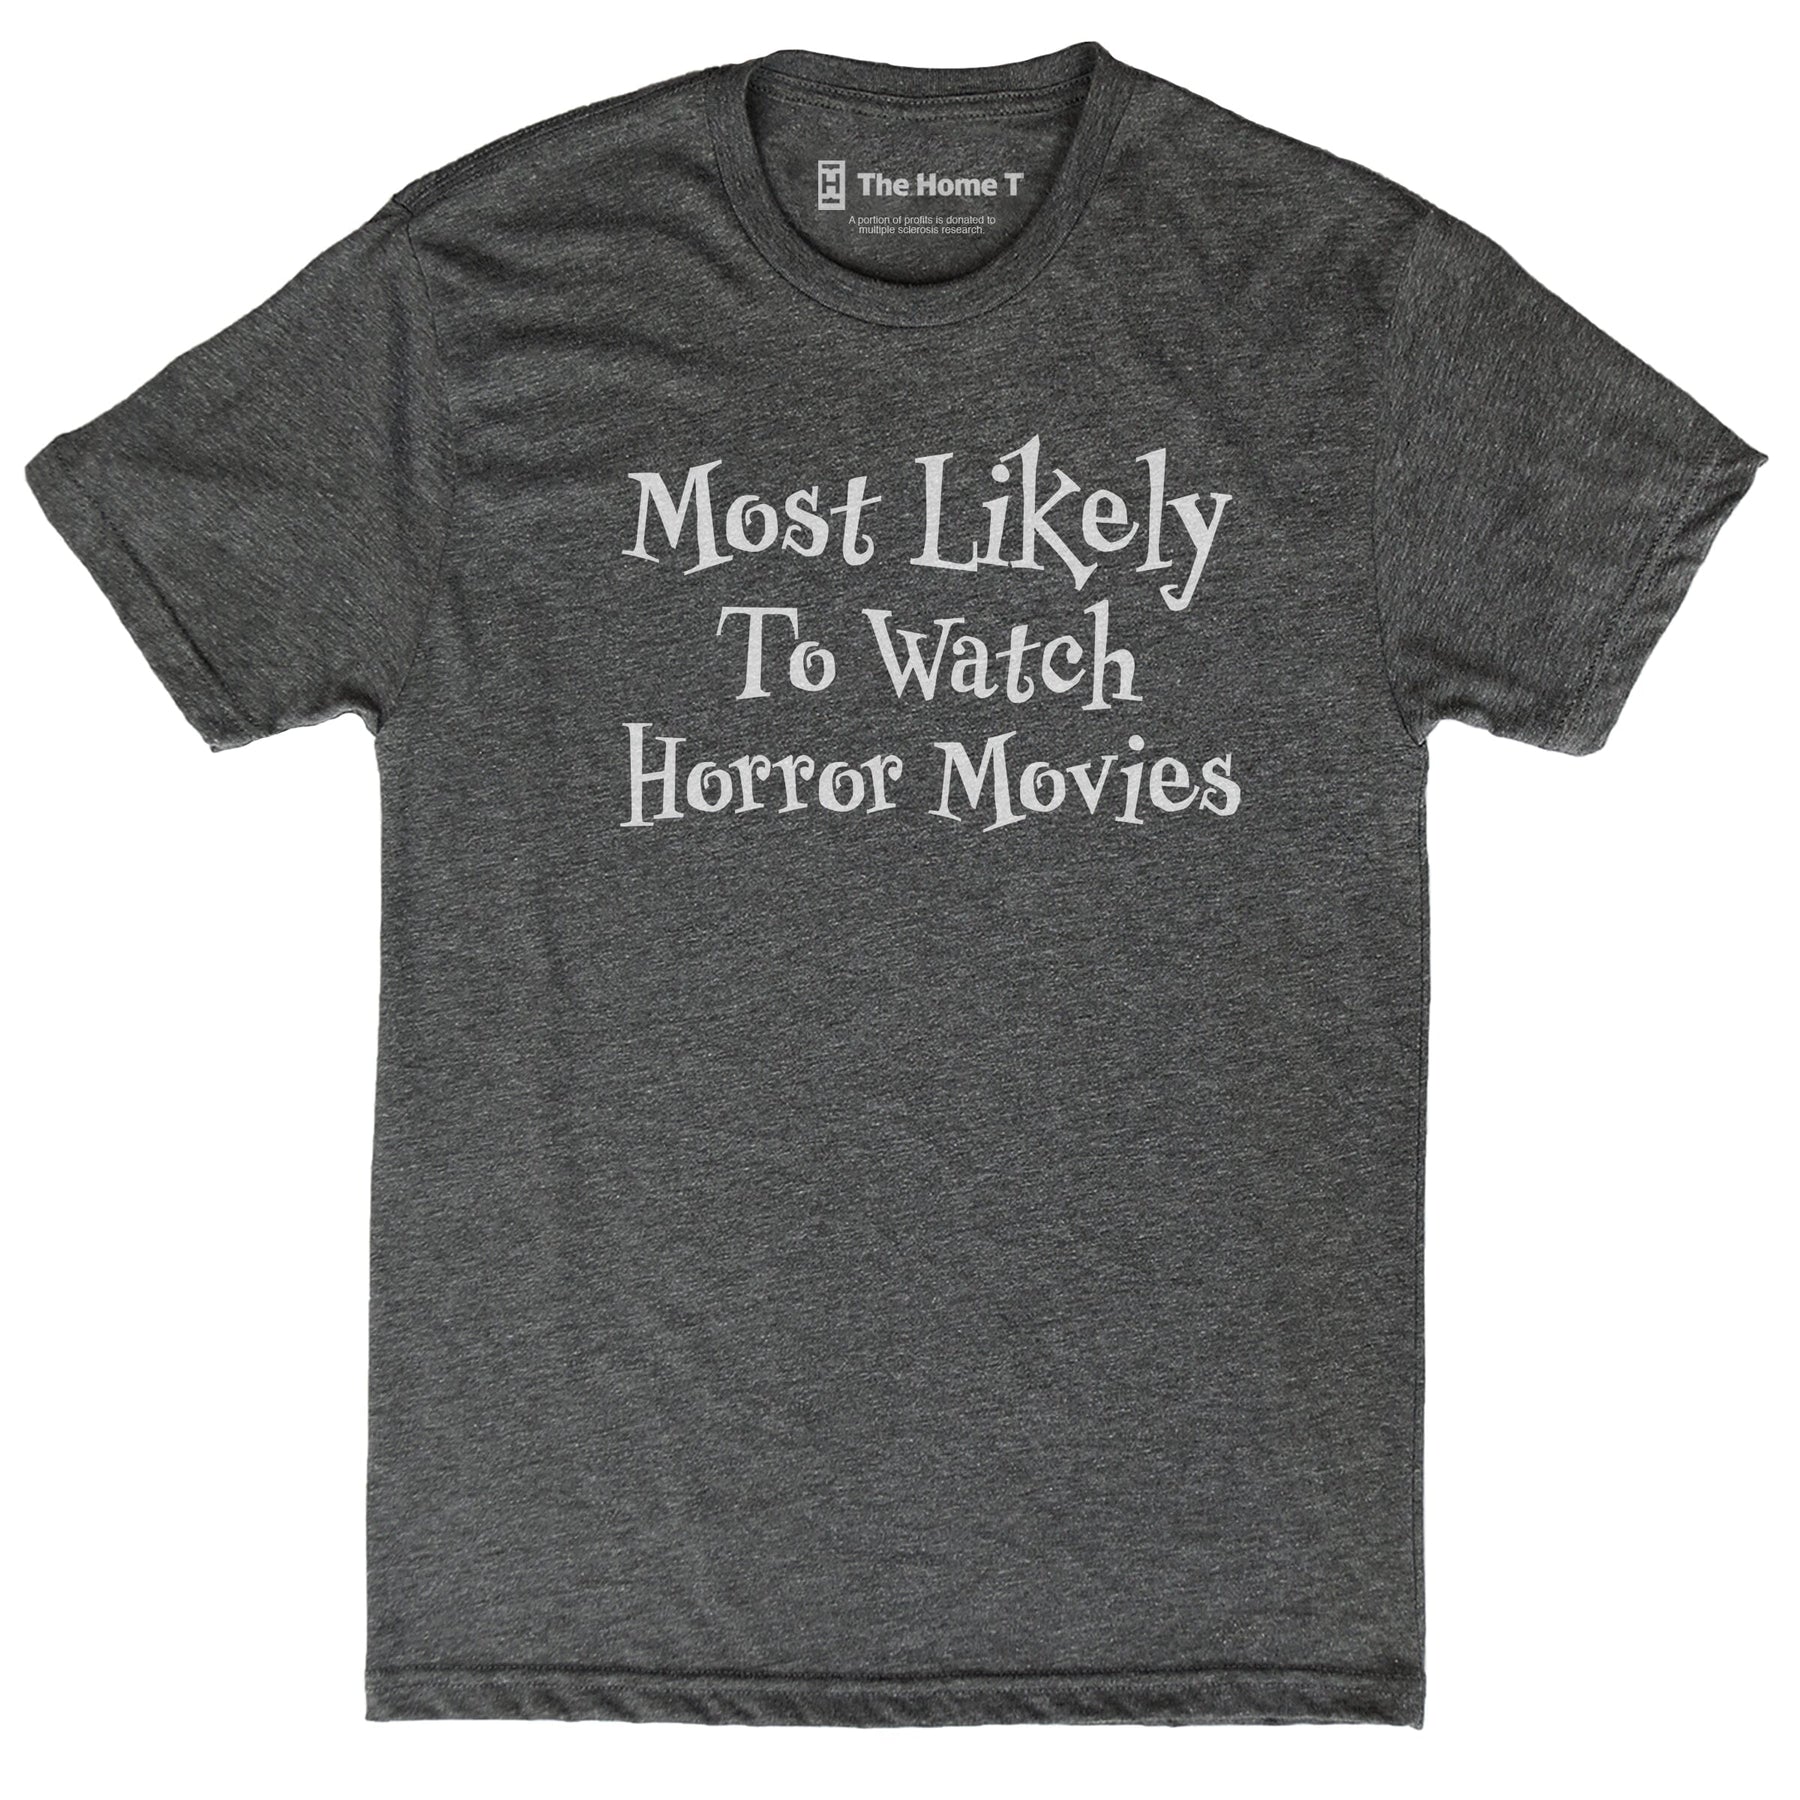 Most Likely to Watch Horror Movies